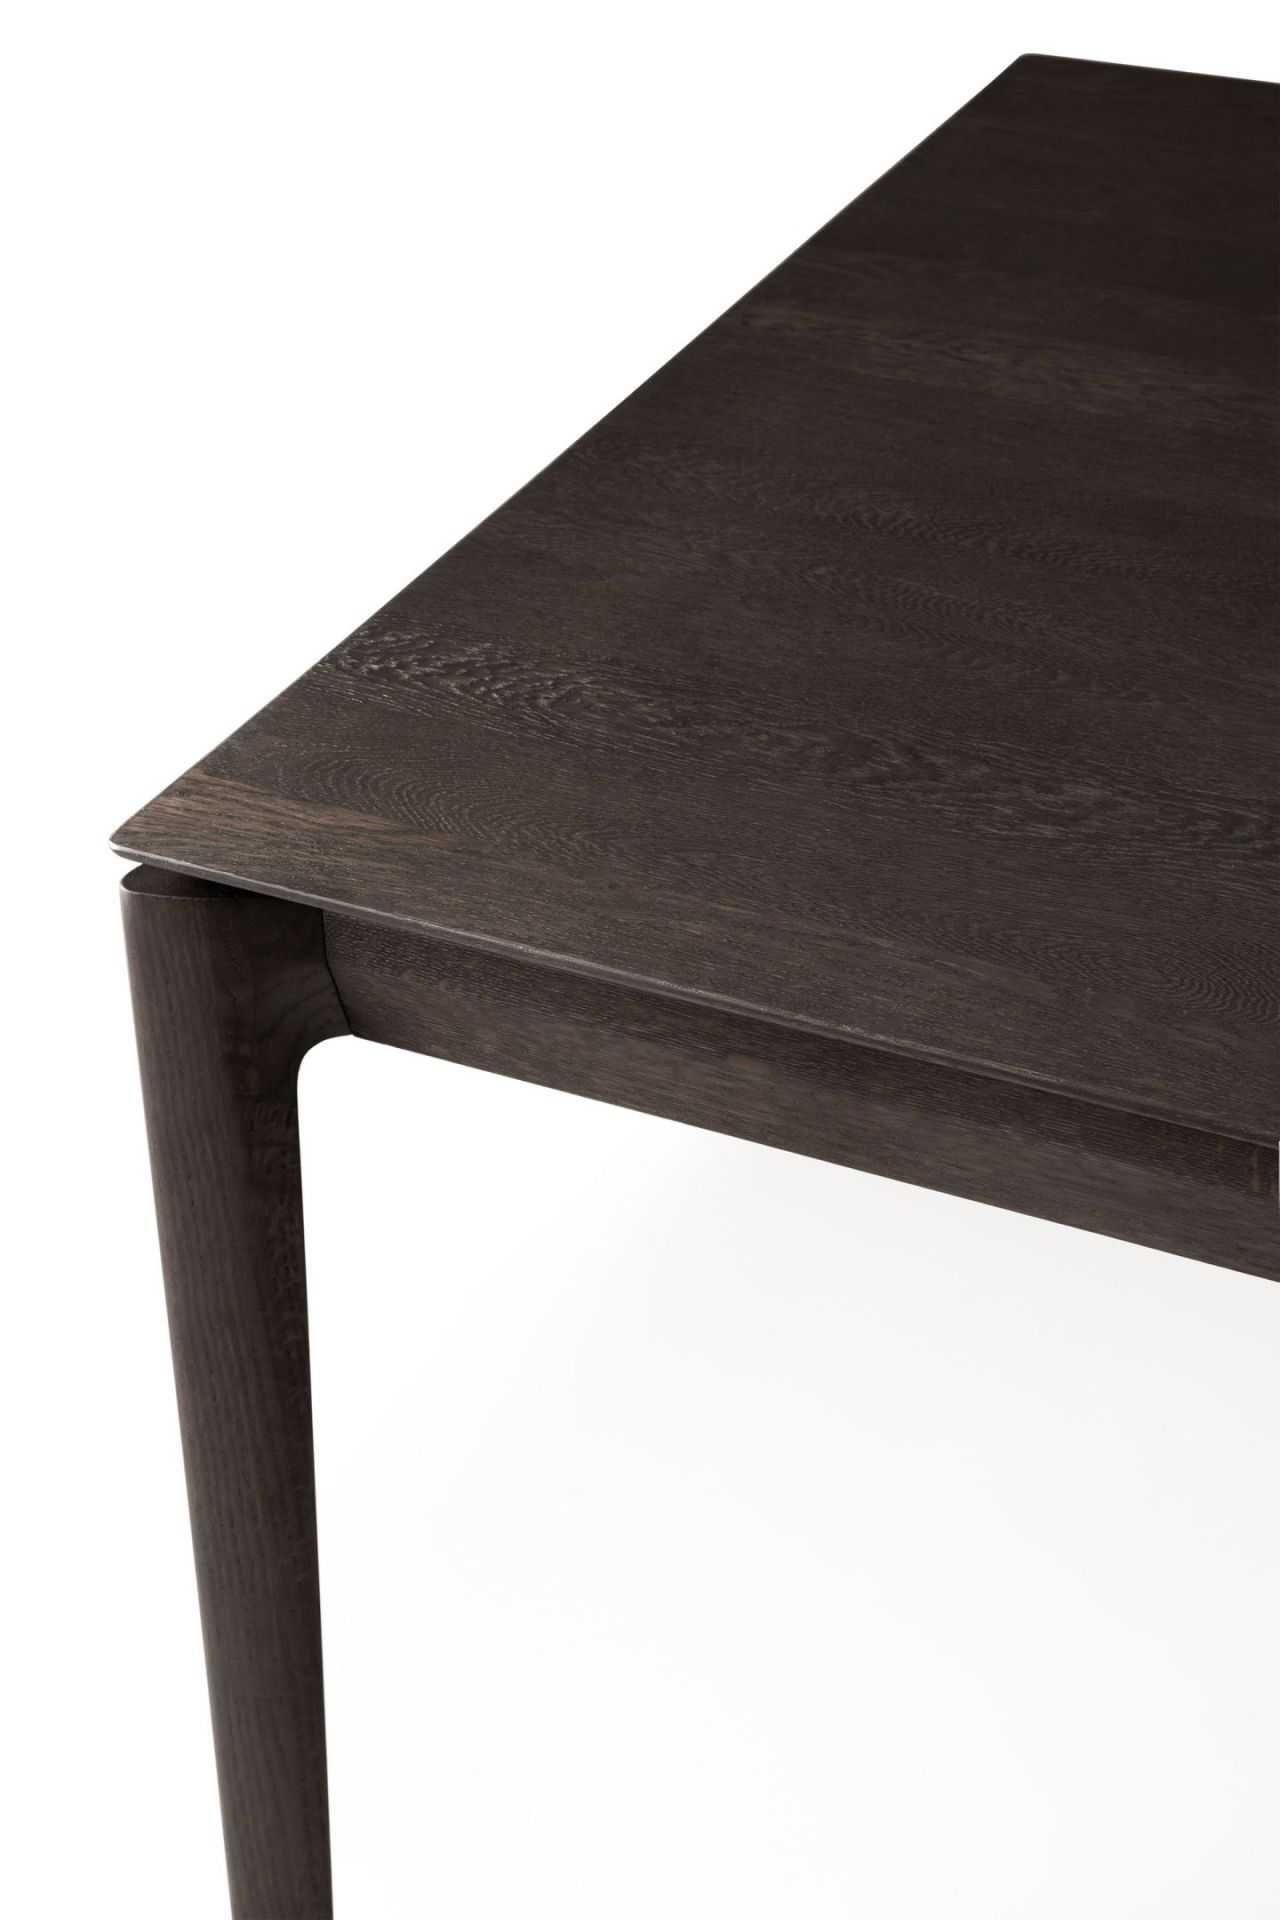 Ethnicraft Bok Table Oak brown lacquered 160x80x76